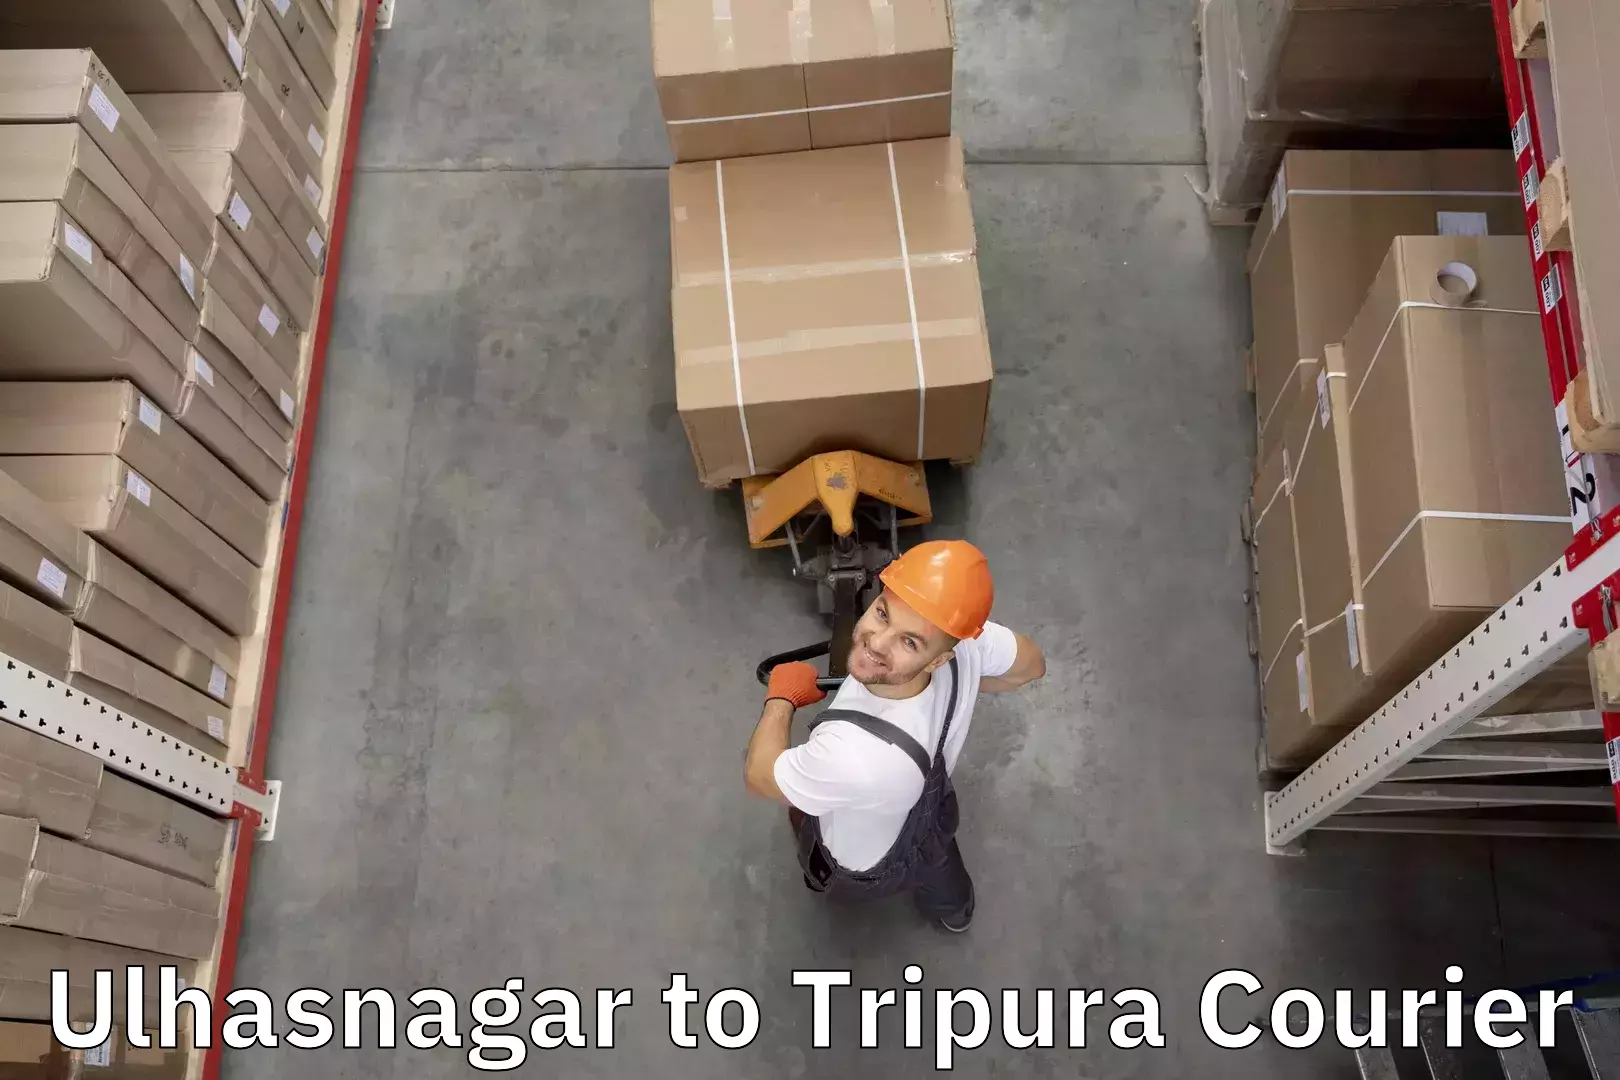 Luggage delivery system Ulhasnagar to Tripura